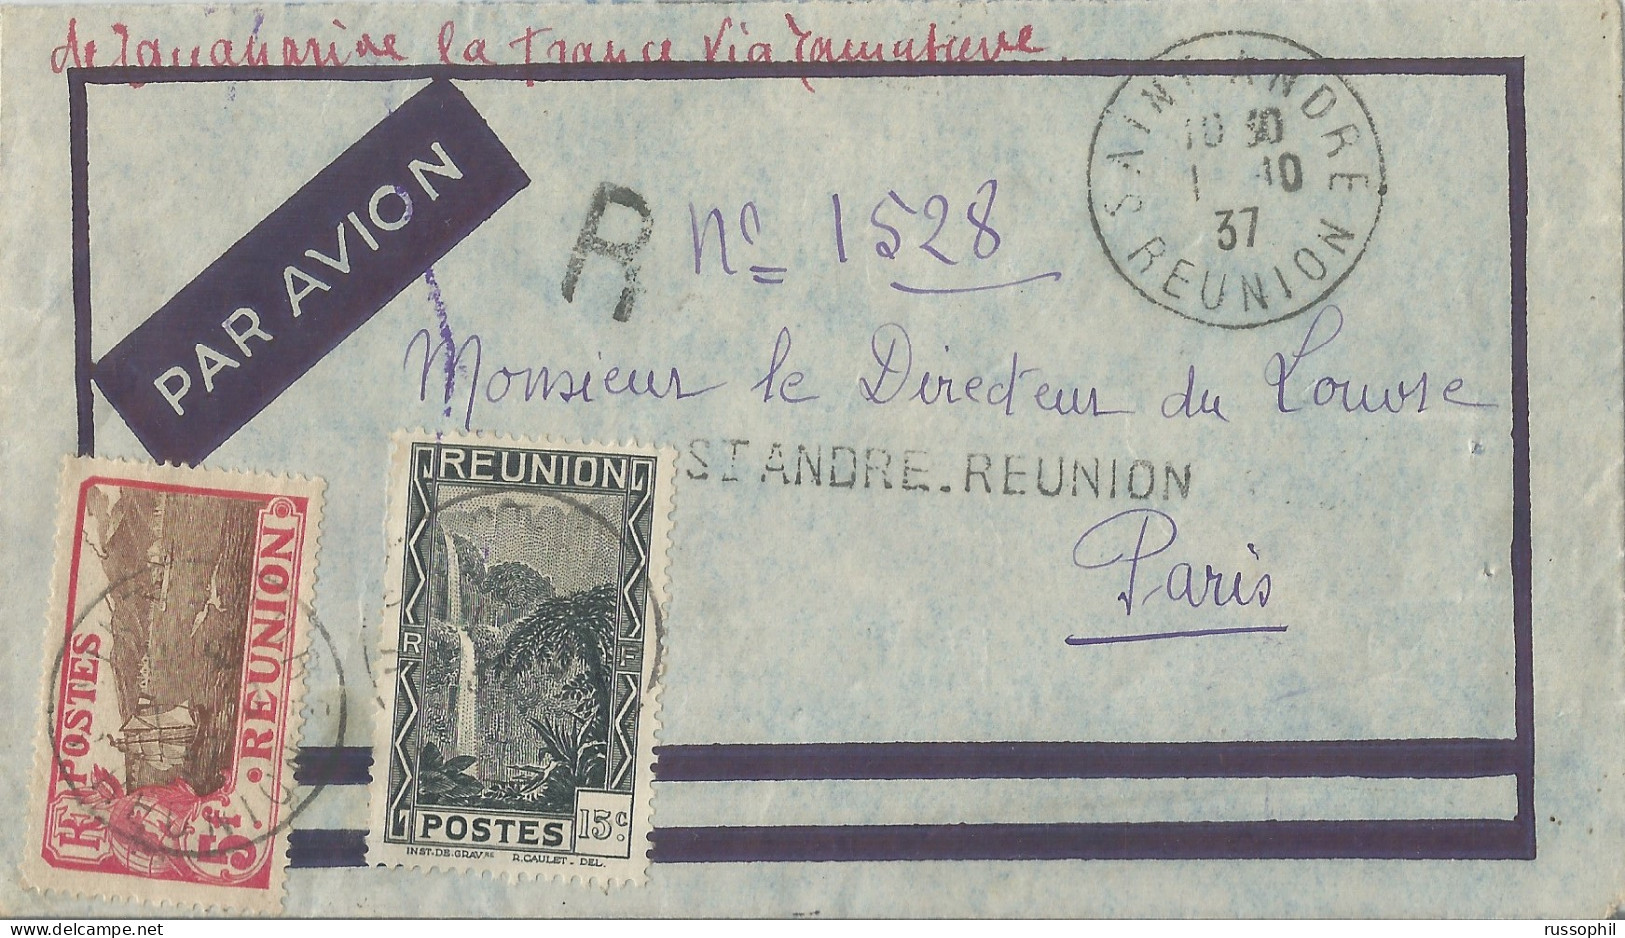 REUNION - 5 FR 15 CENT.  2 STAMP FRANKING ON REGISTERED AIR COVER FROM SAINT ANDRE TO MAINLAND FRANCE - 1937 - Storia Postale